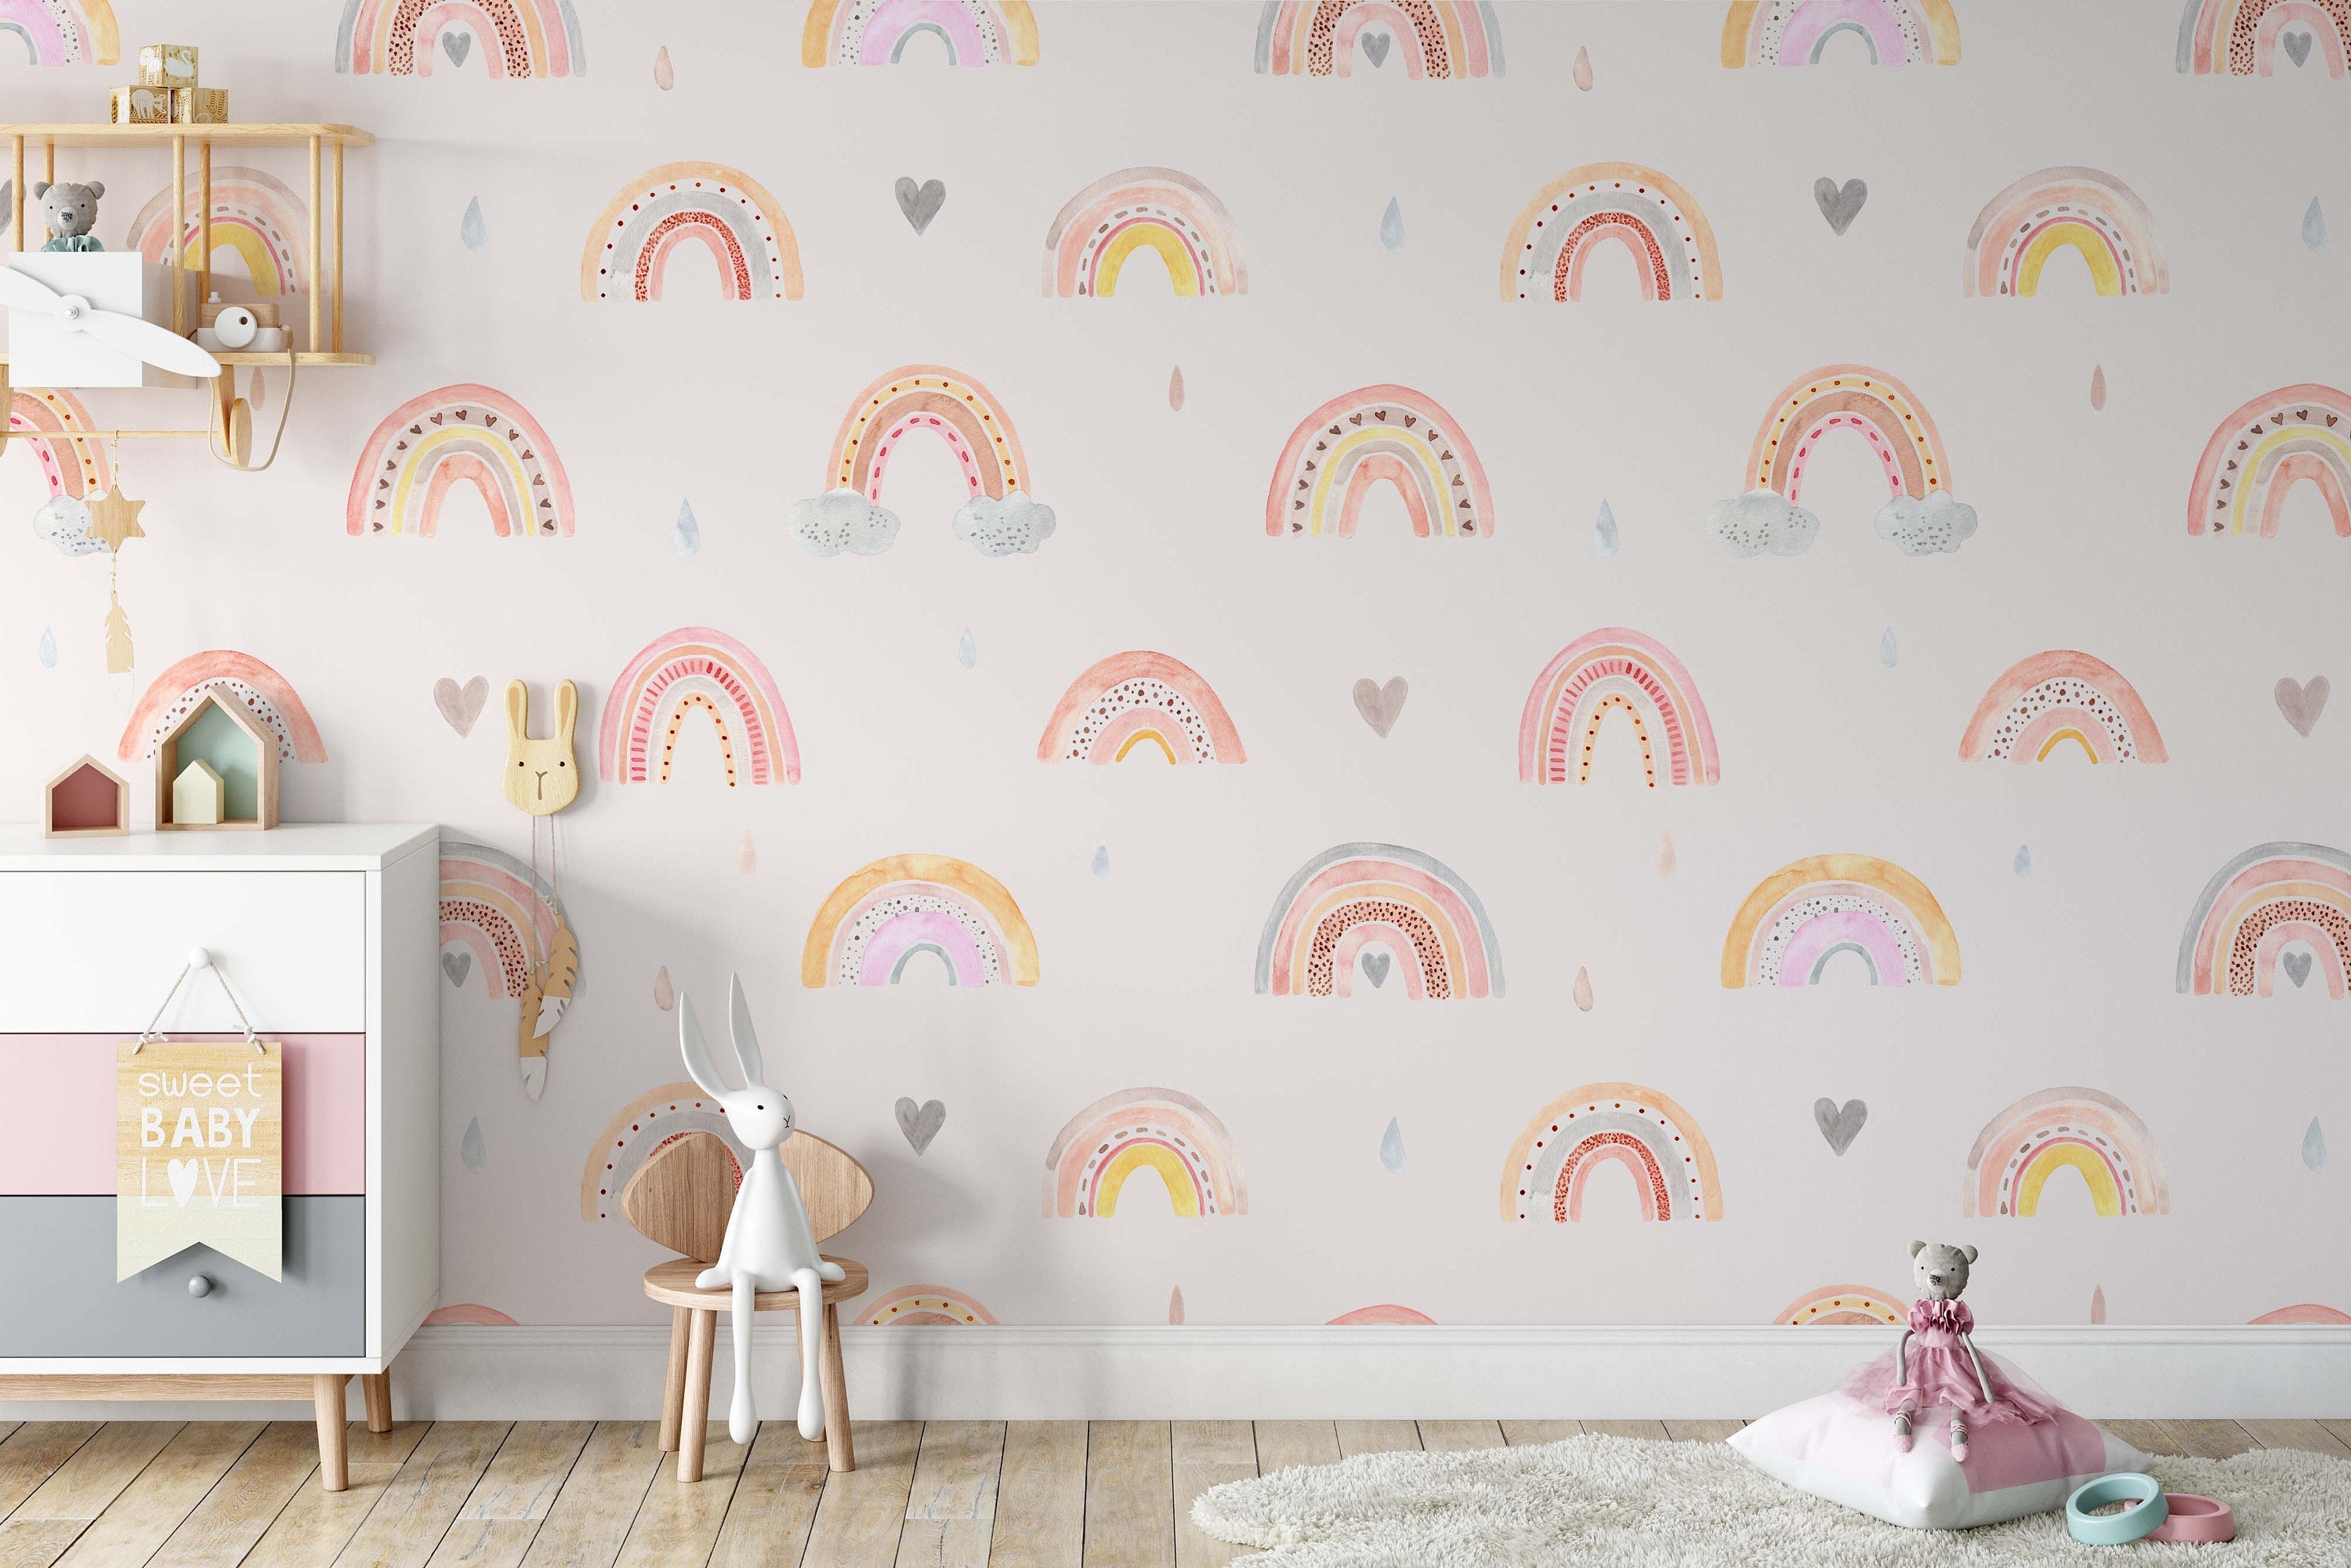 Watercolor Rainbow Rain Clouds Hearts on The Pink Background Wallpaper Animal Bedroom Children Kids Room Mural Home Decor Wall Art Removable